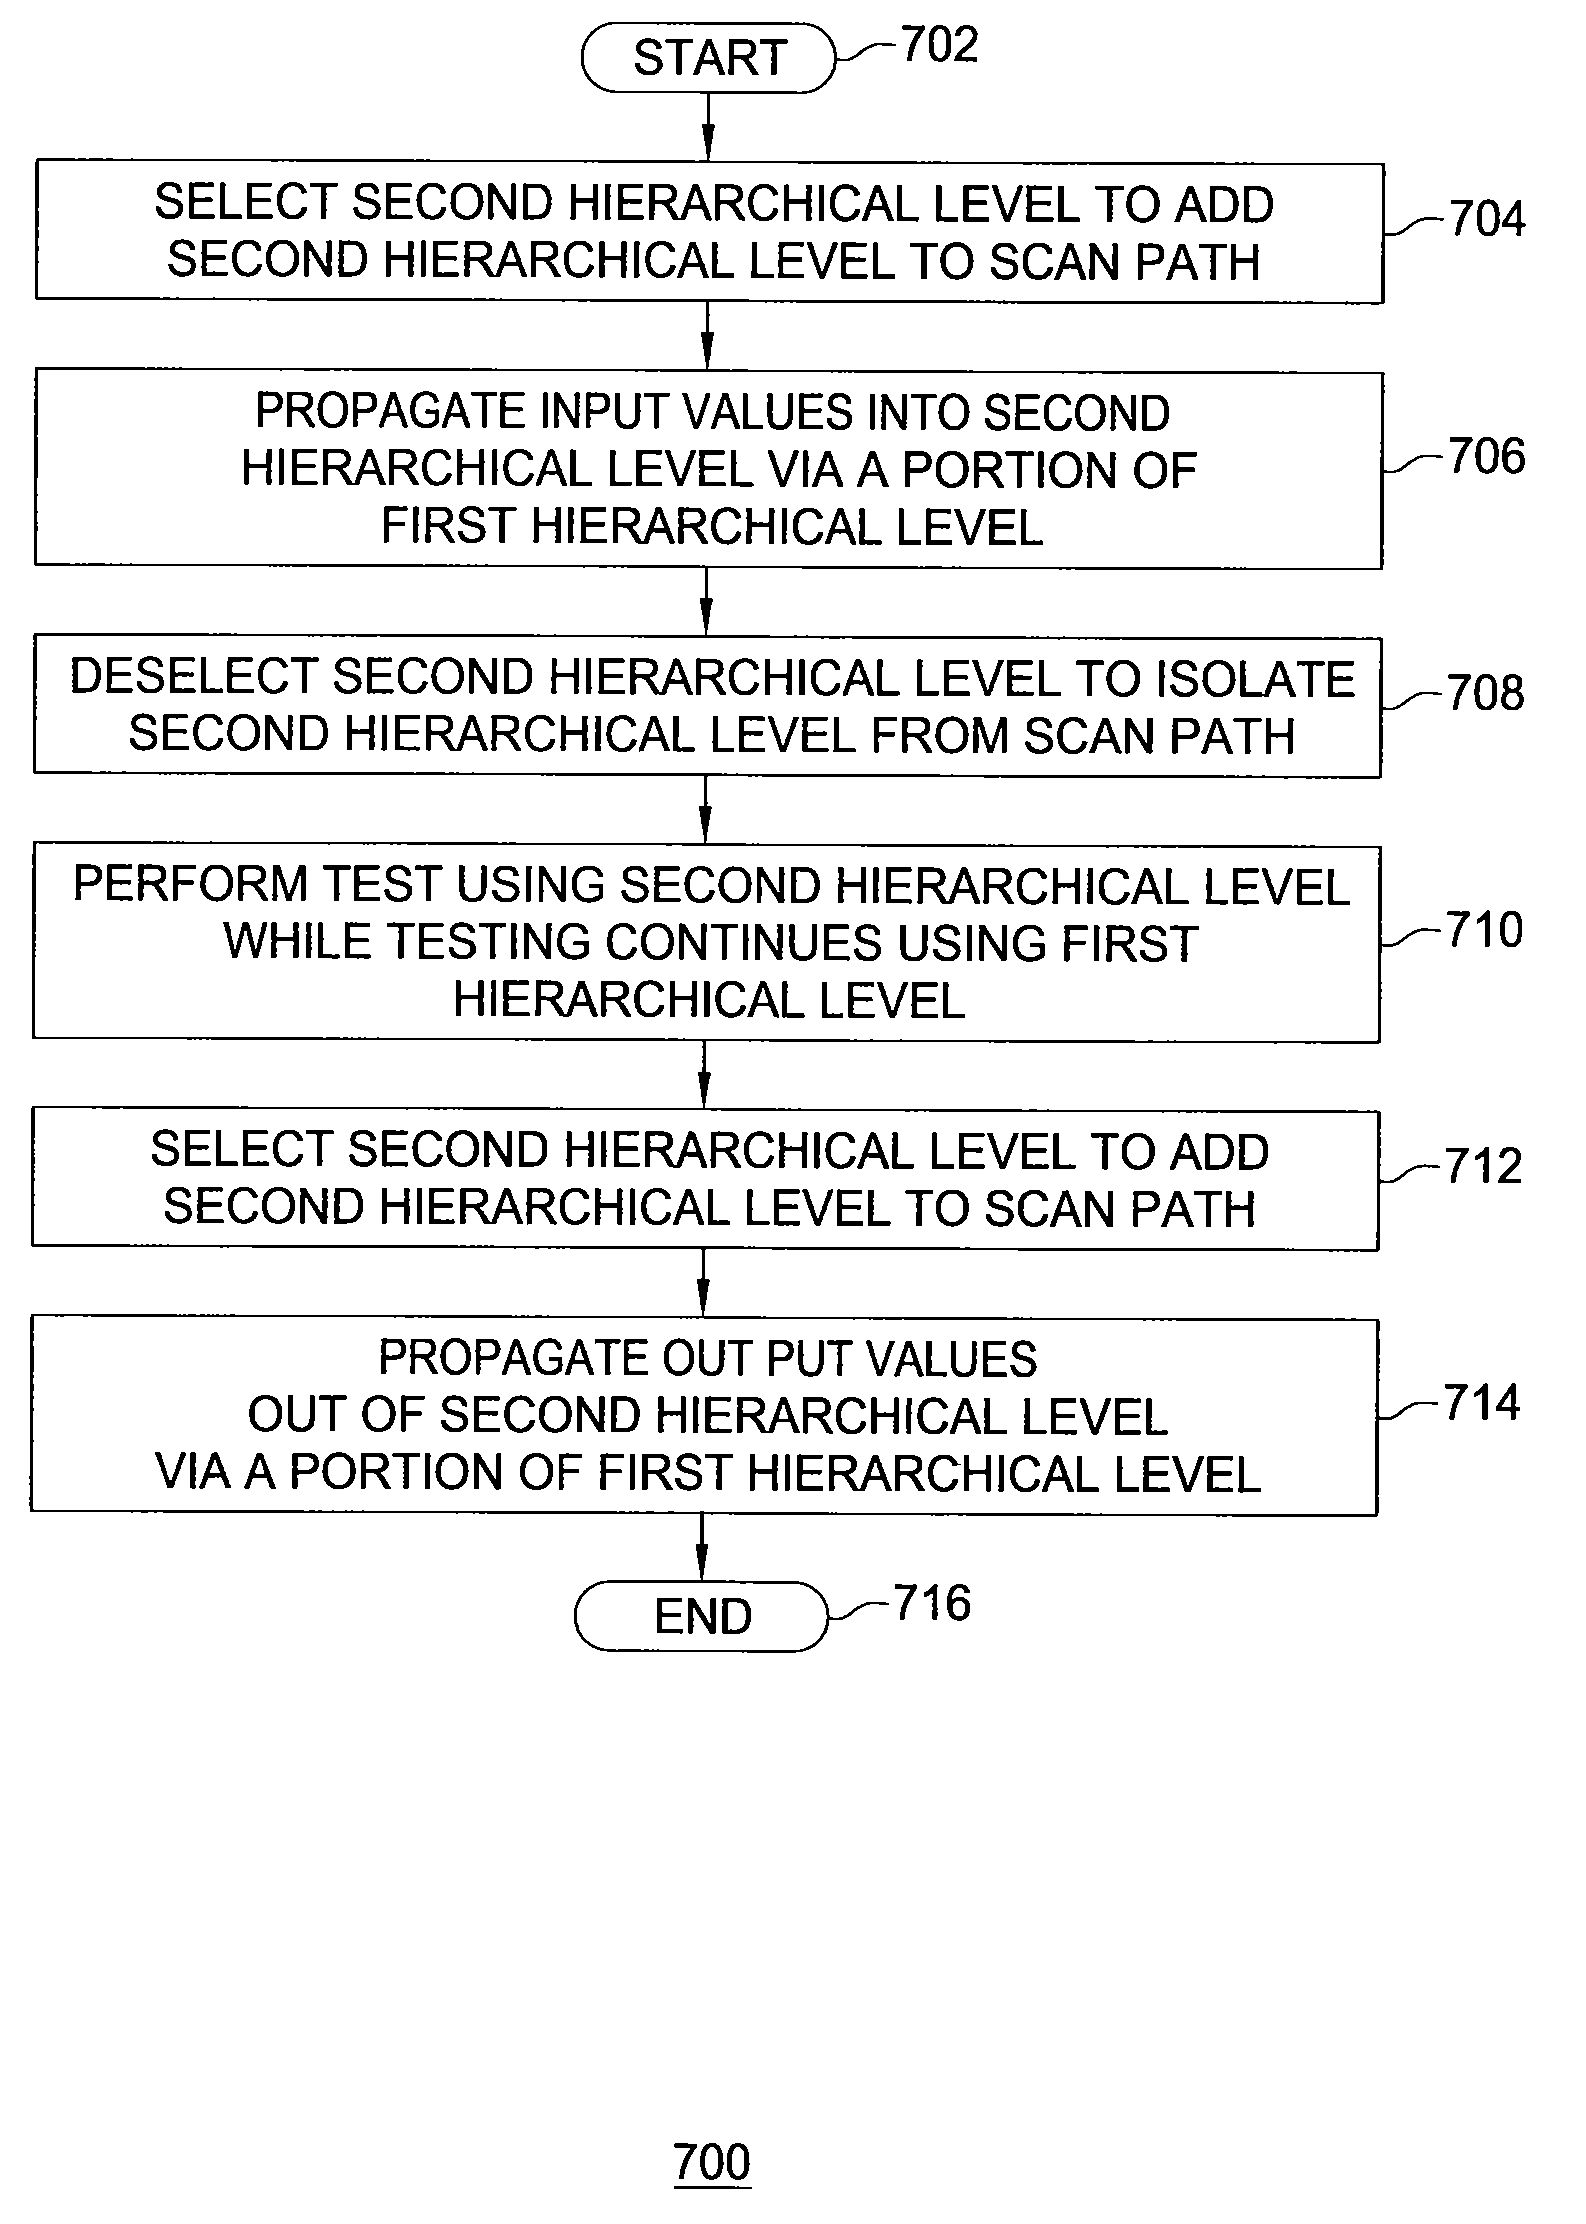 Apparatus and Method for Isolating Portions of a Scan Path of a System-on-Chip